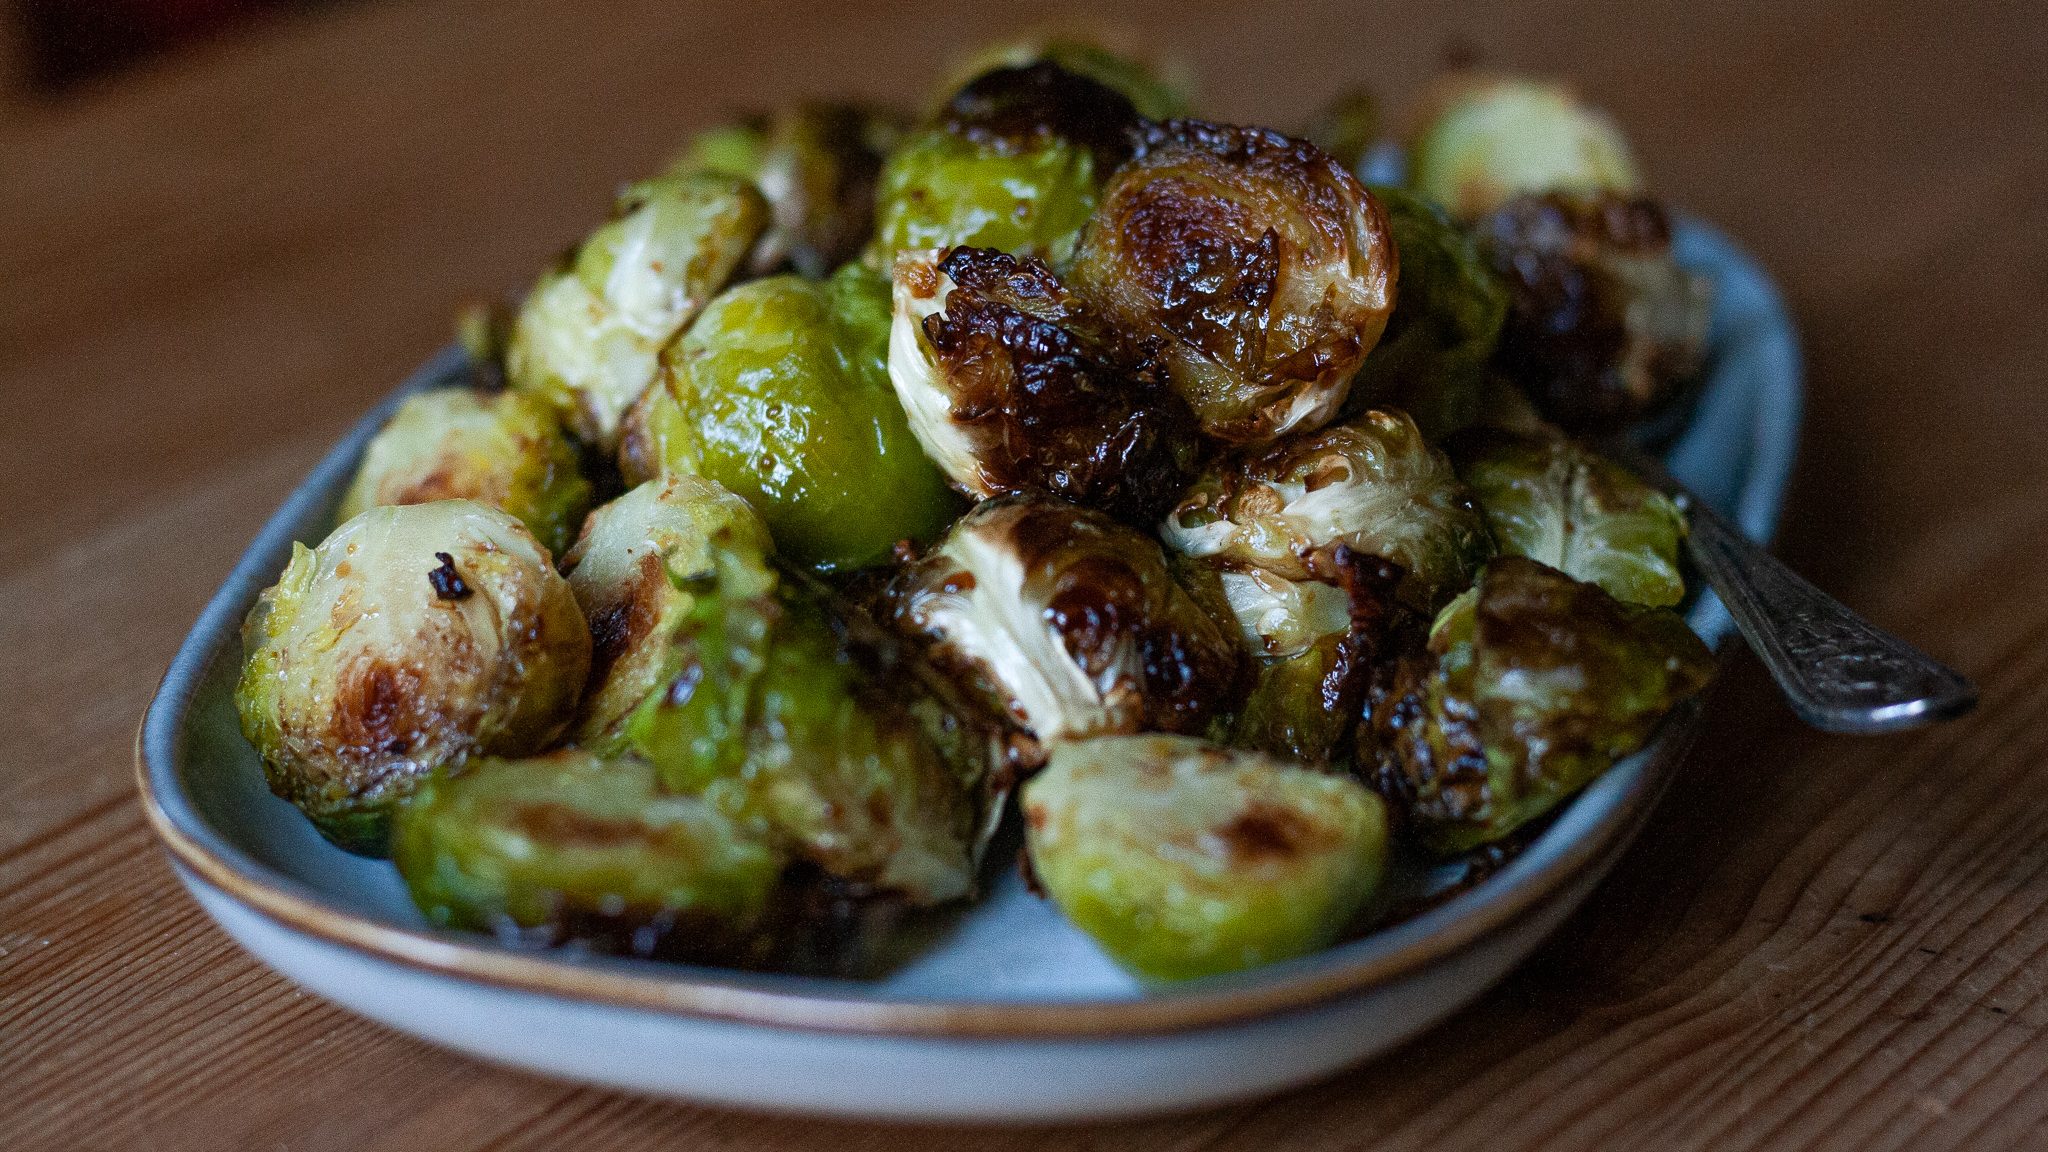 Tasty Roasted Brussels Sprouts Recipe